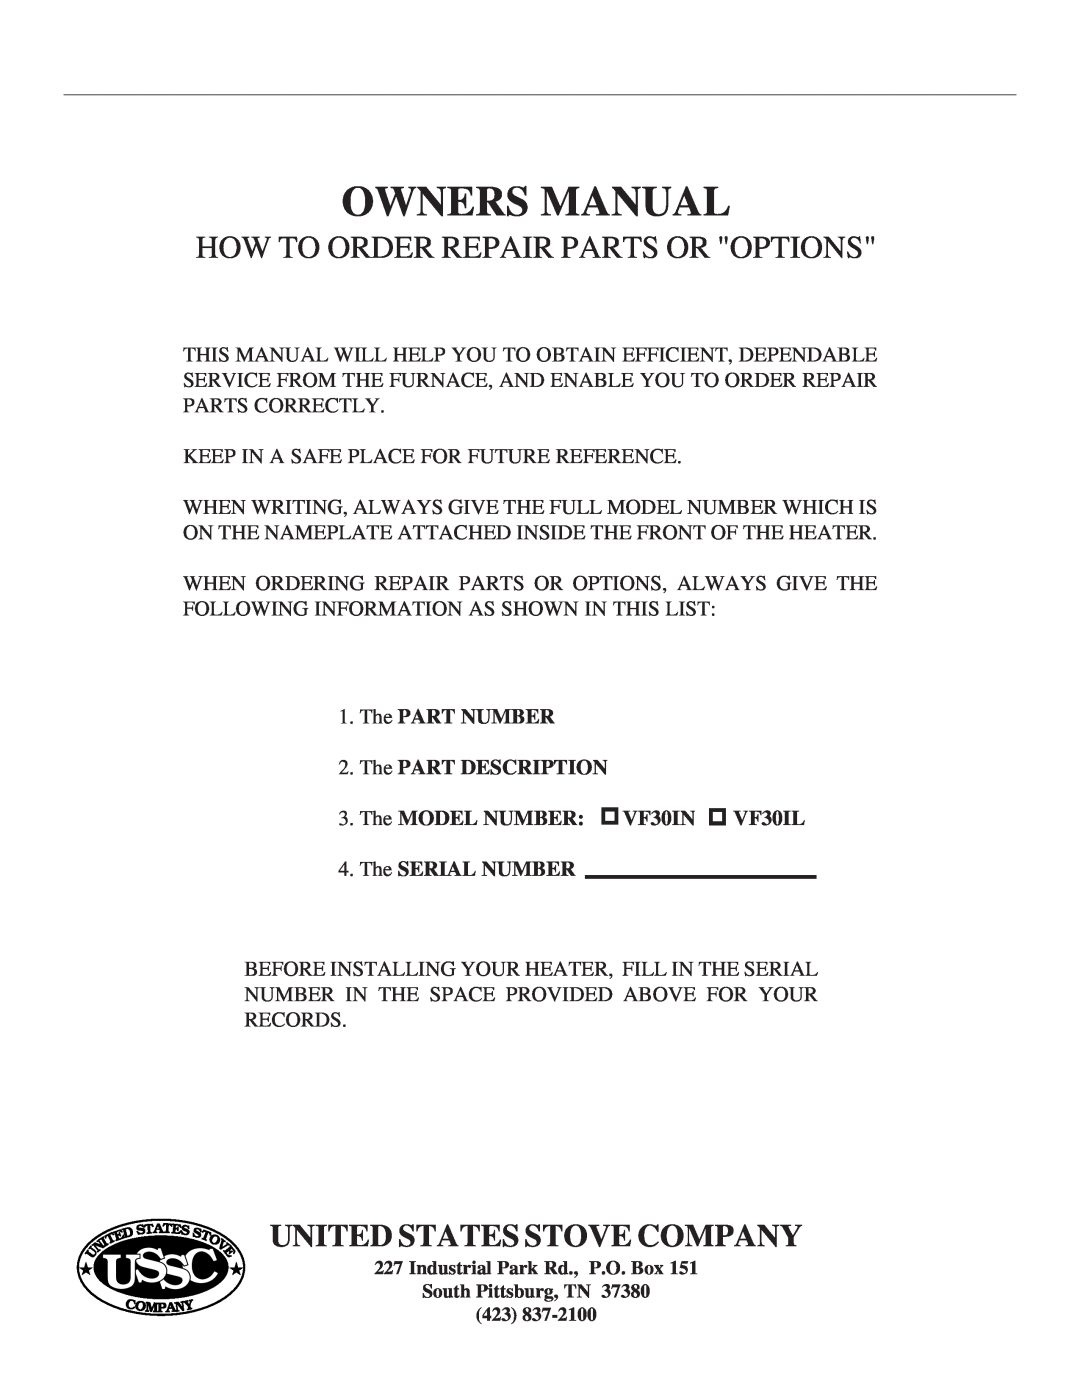 United States Stove VF30IN, VF30IL United States Stove Company, Ussc, Owners Manual, How To Order Repair Parts Or Options 